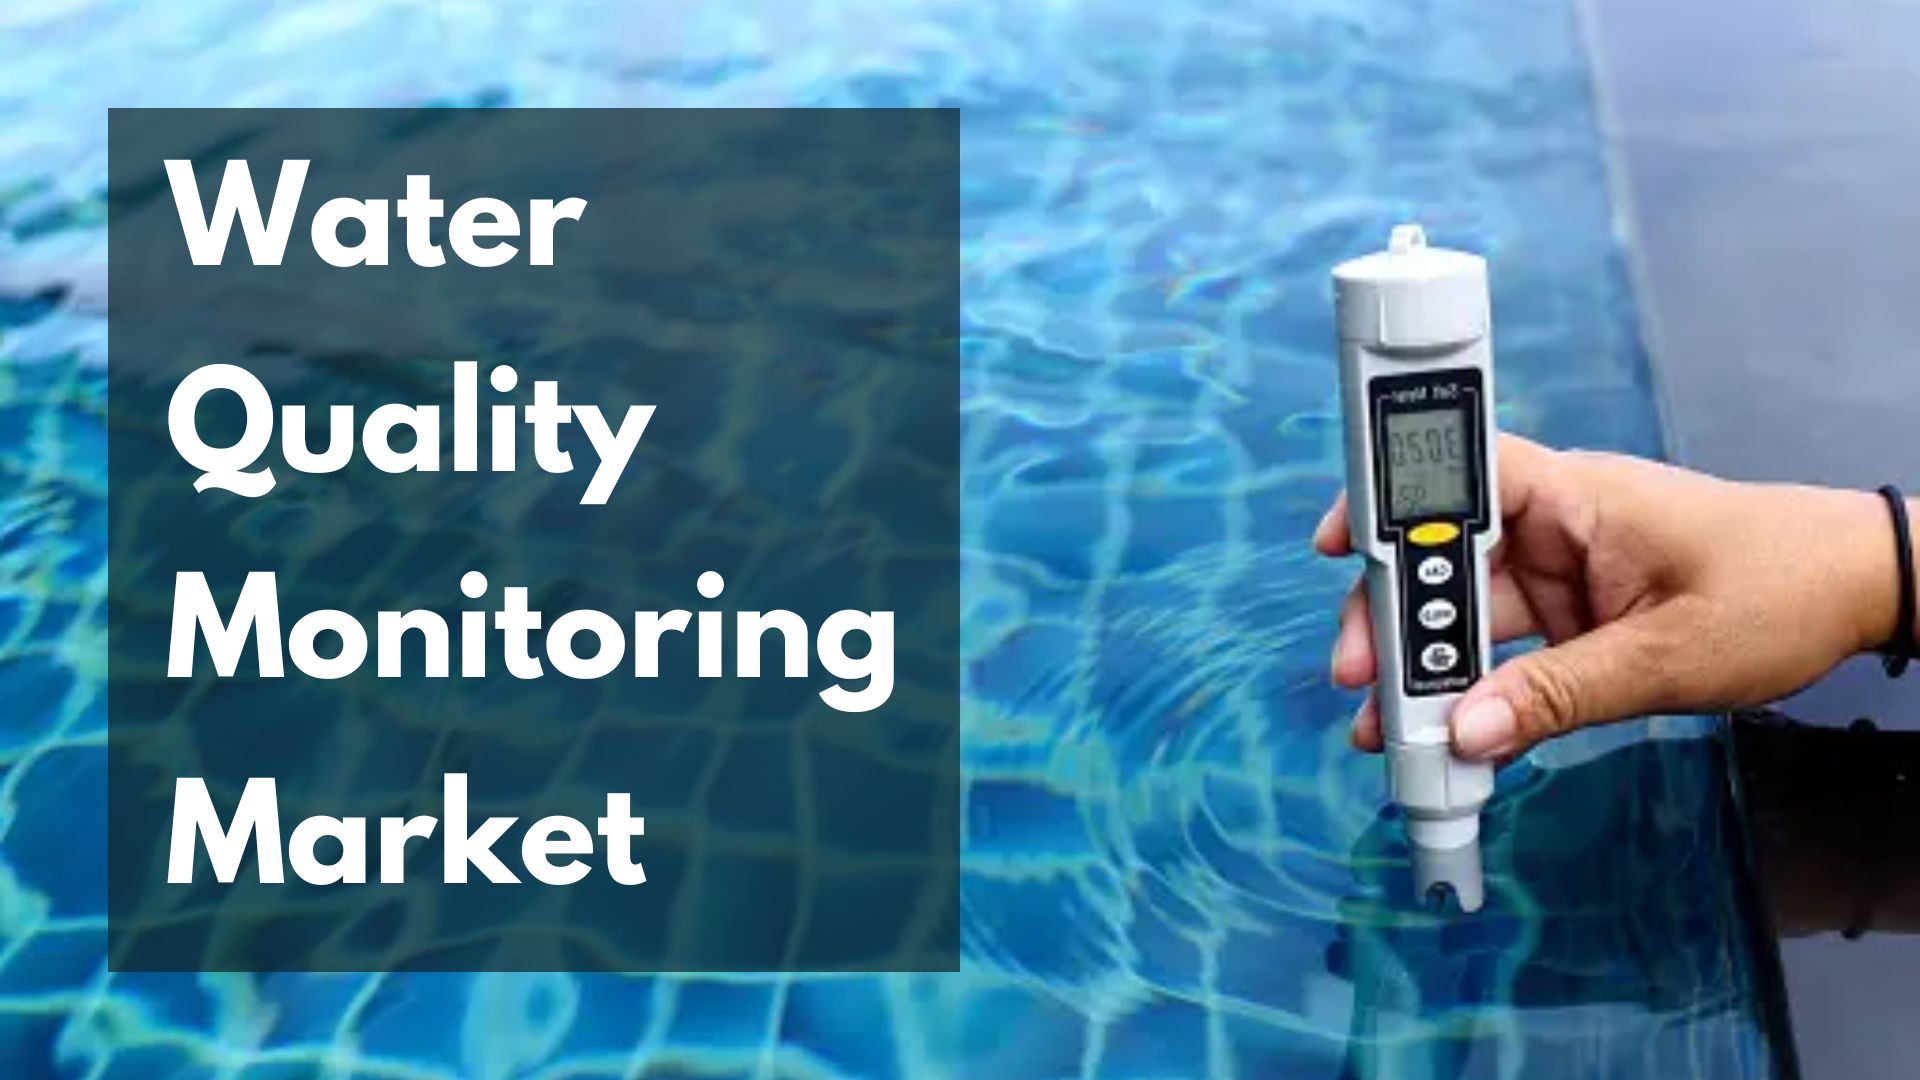 Water Quality Monitoring Market Products: TOC Analyzers, pH Meters, and Dissolved Oxygen Analyzers